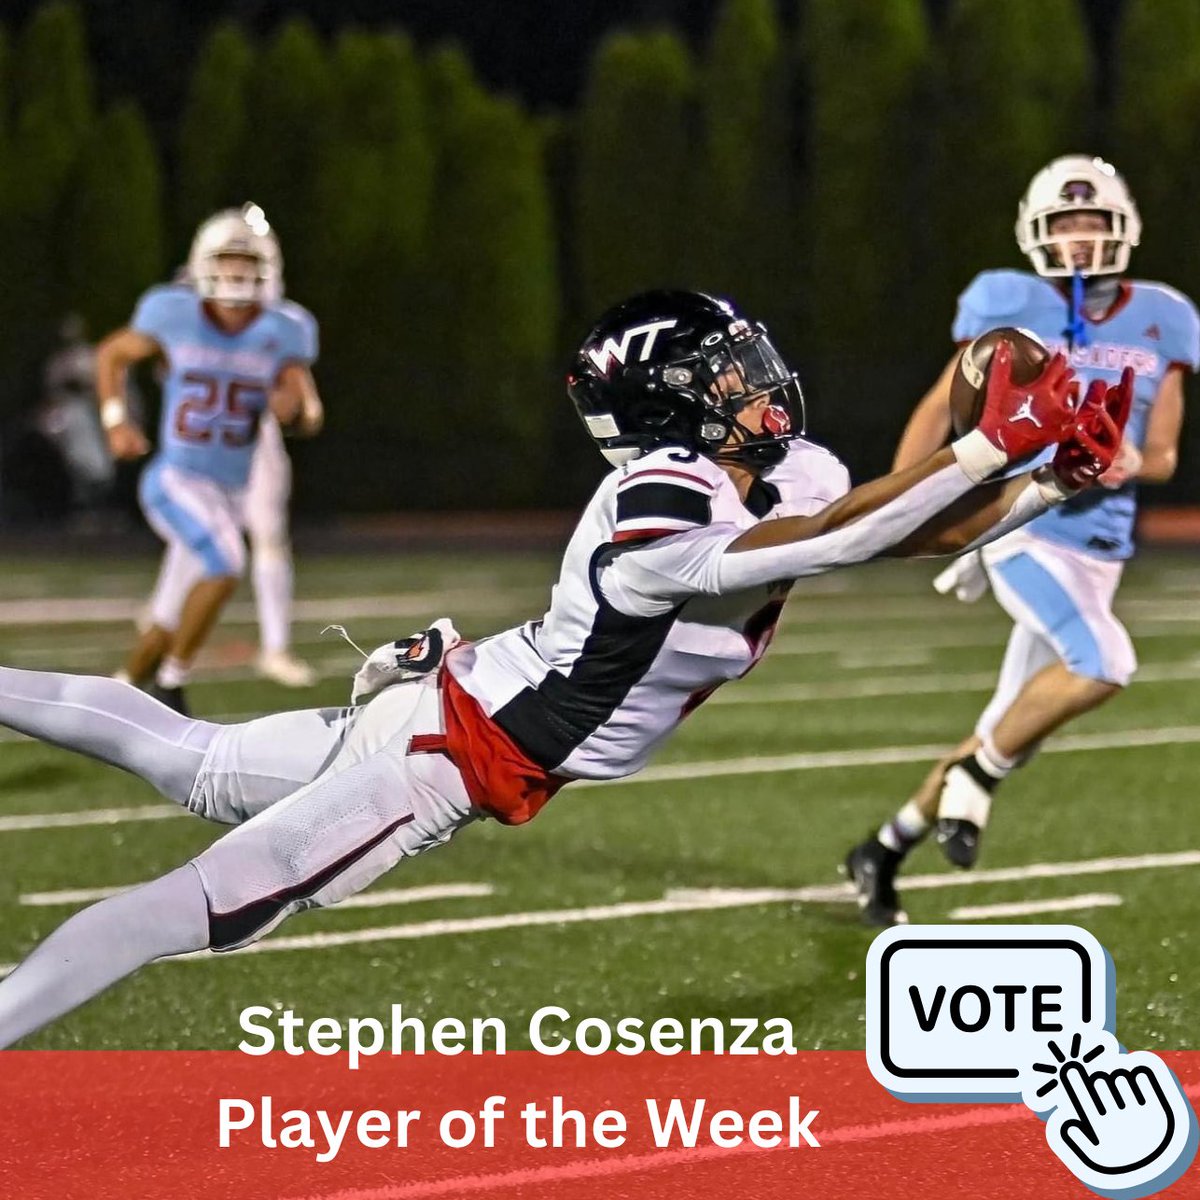 TIME TO VOTE!!

Tennent Football's Stephen Cosenza is up for Football Player of the Week for Phillyburbs Courier/Intel. The senior receiver had four catches for 88 yards, including a 32-yard touchdown & diving 31-yard grab.
phillyburbs.com/story/sports/h…
Photo Kadi Marie Photography